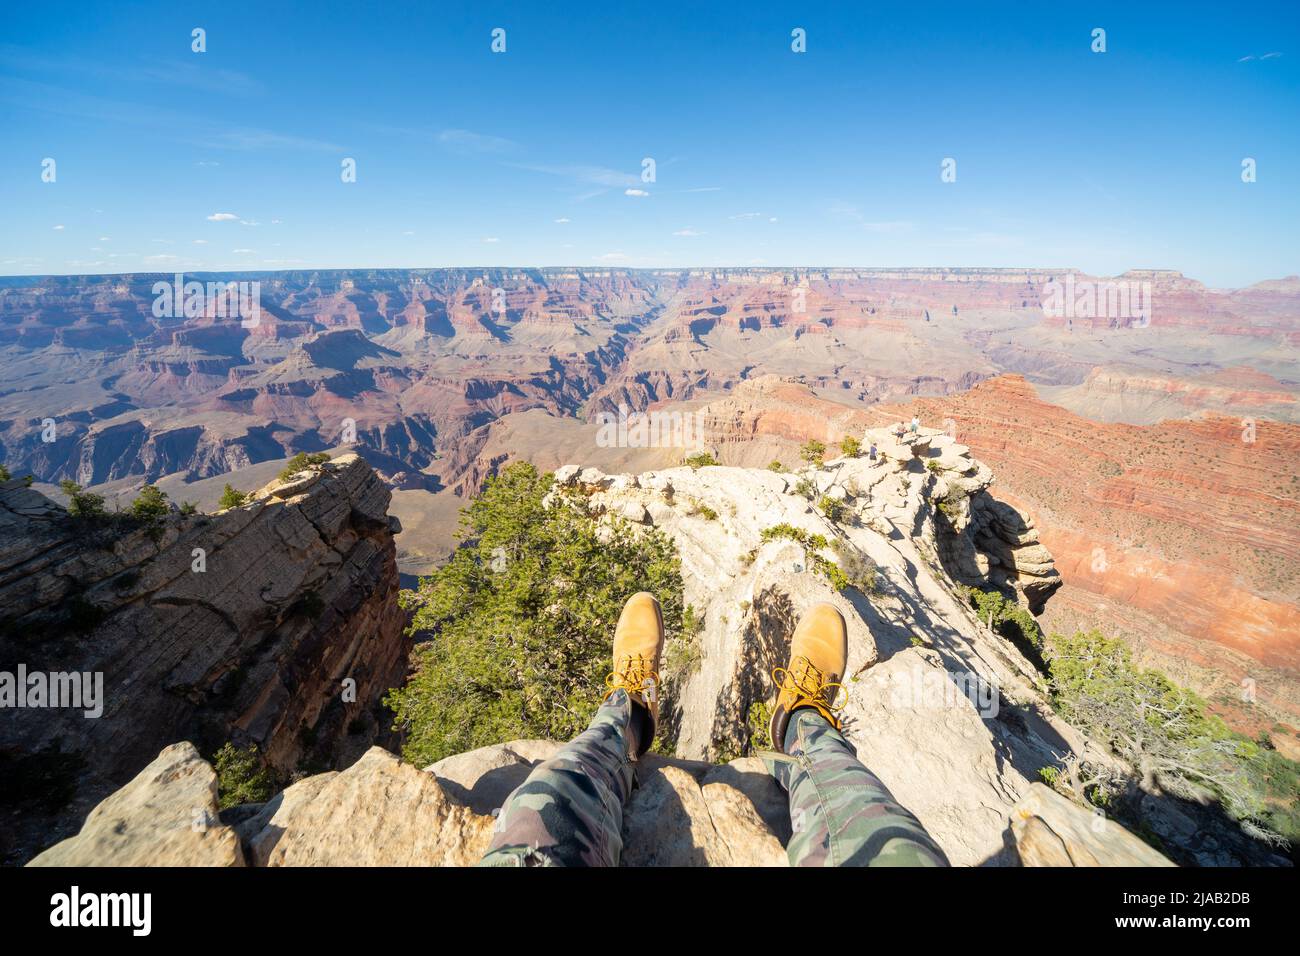 Grand Canyon South Rim, Arizona, USA. Feet of the photographer visible provides perspective. Vastness, openness. View from Rim Trail west of Mather Pt Stock Photo